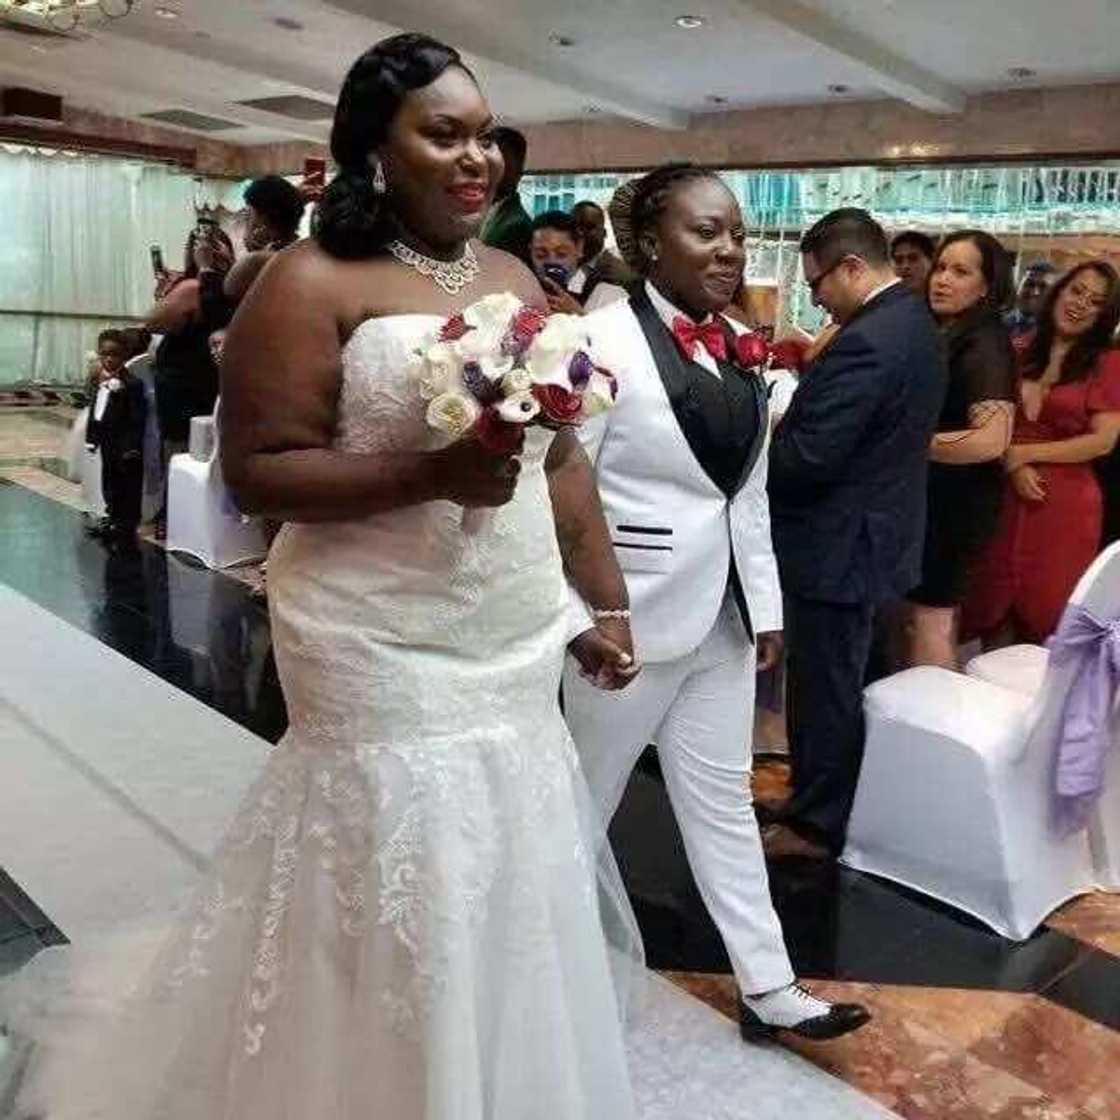 YEN.com.gh has more photos of the lesbian Ghanaian couple who wedded in Holland